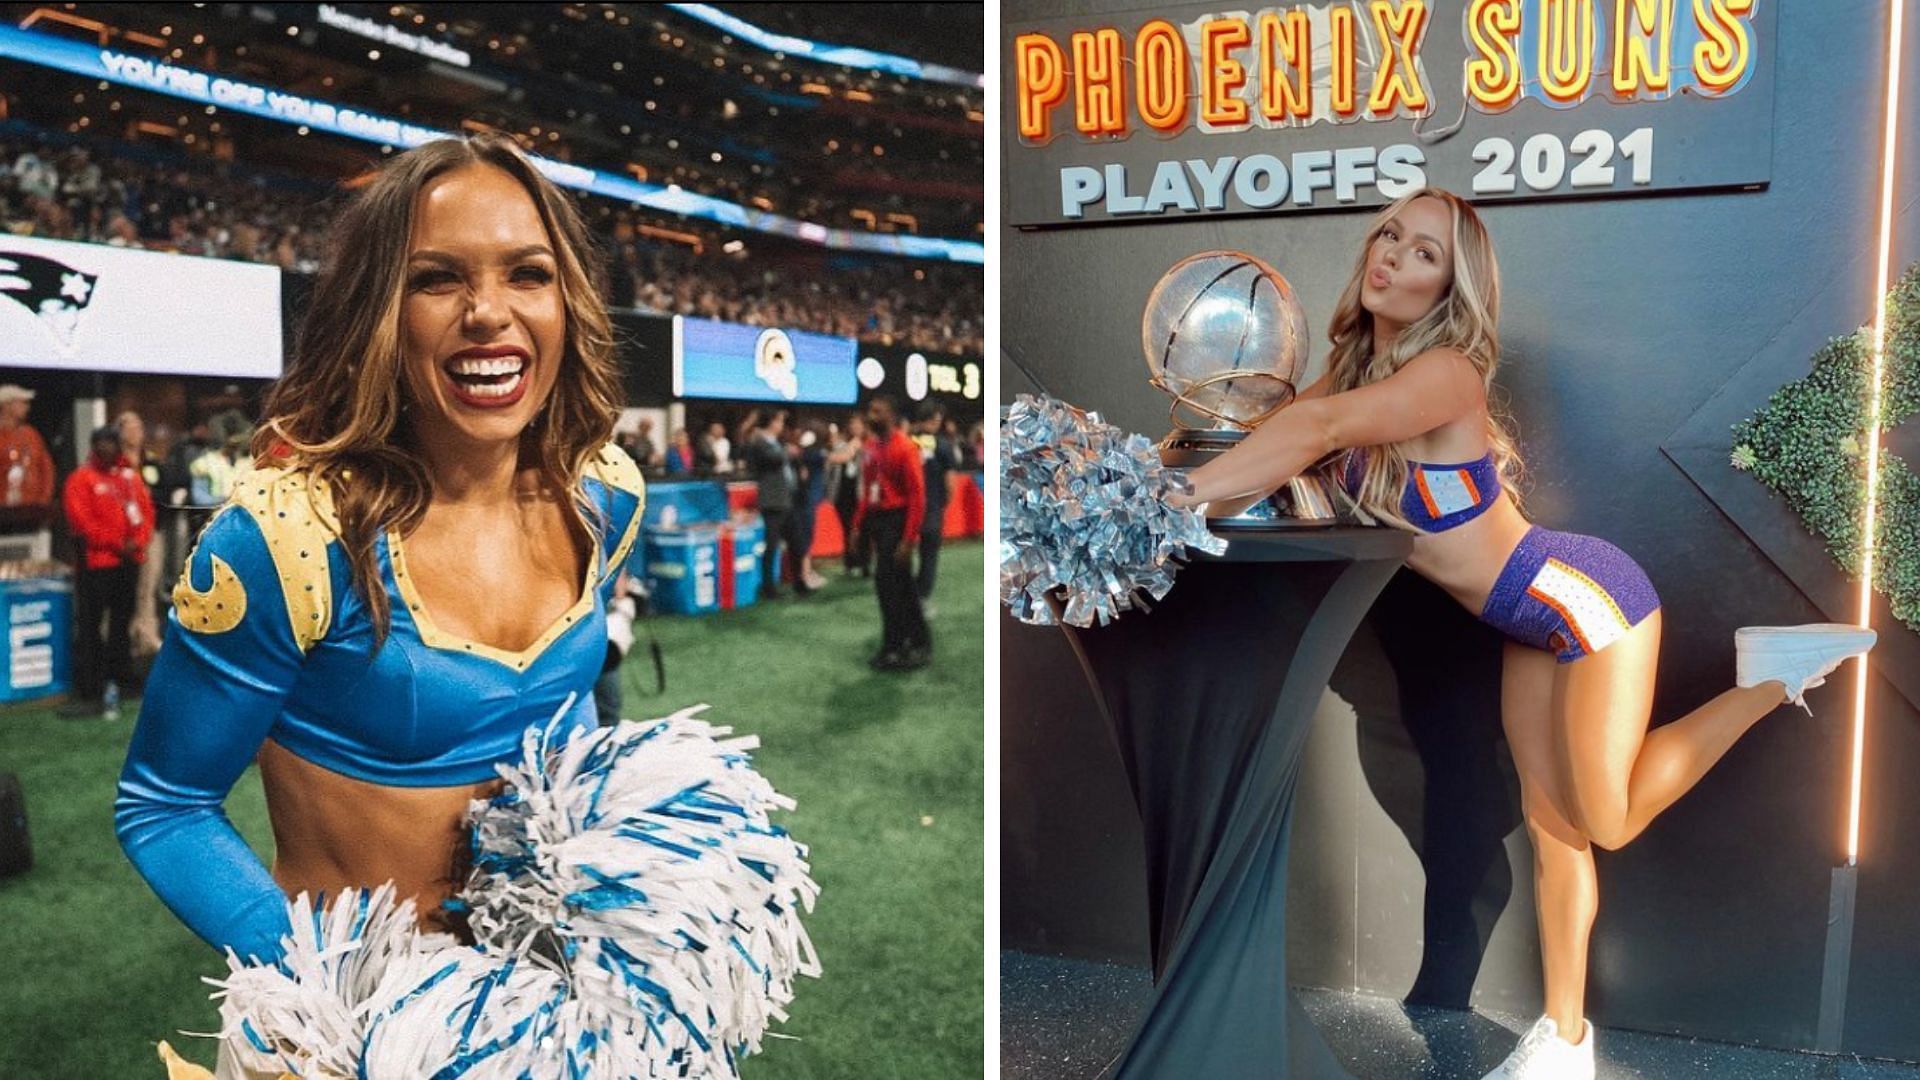 Maxxine Dupri as a cheerleader for the LA Rams and Phoenix Suns, respectively